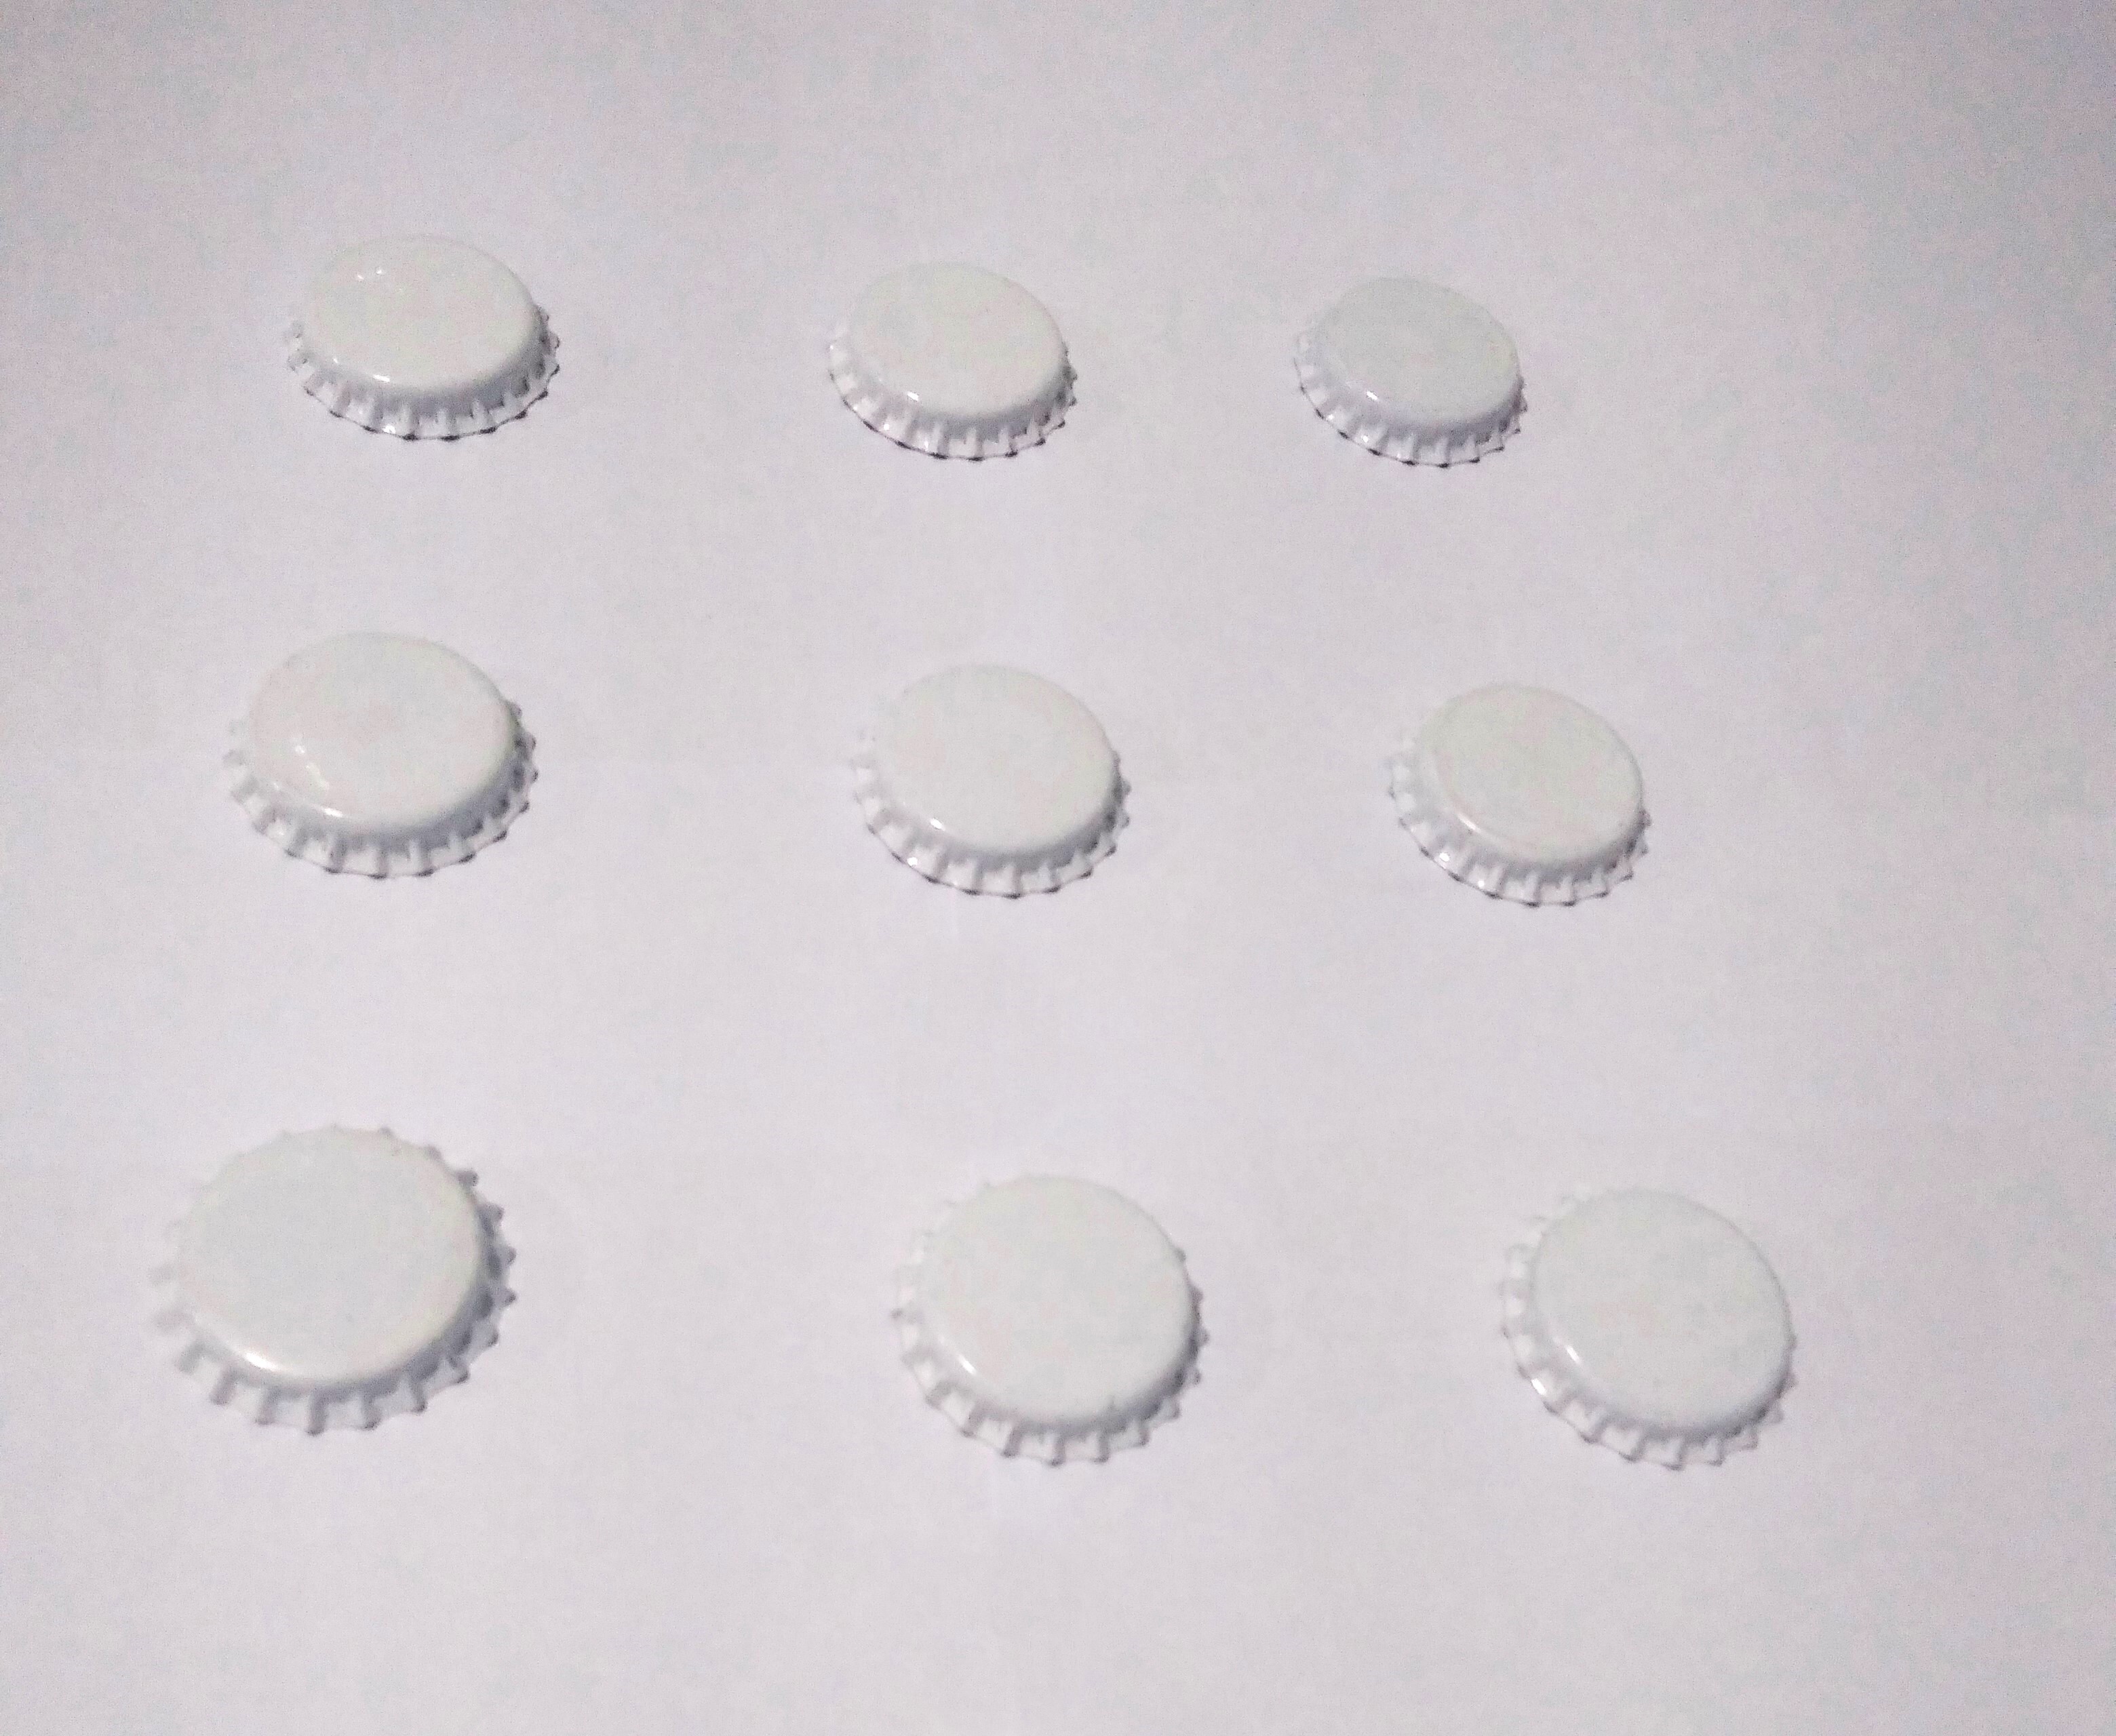 Polyester White Crown Corks Caps